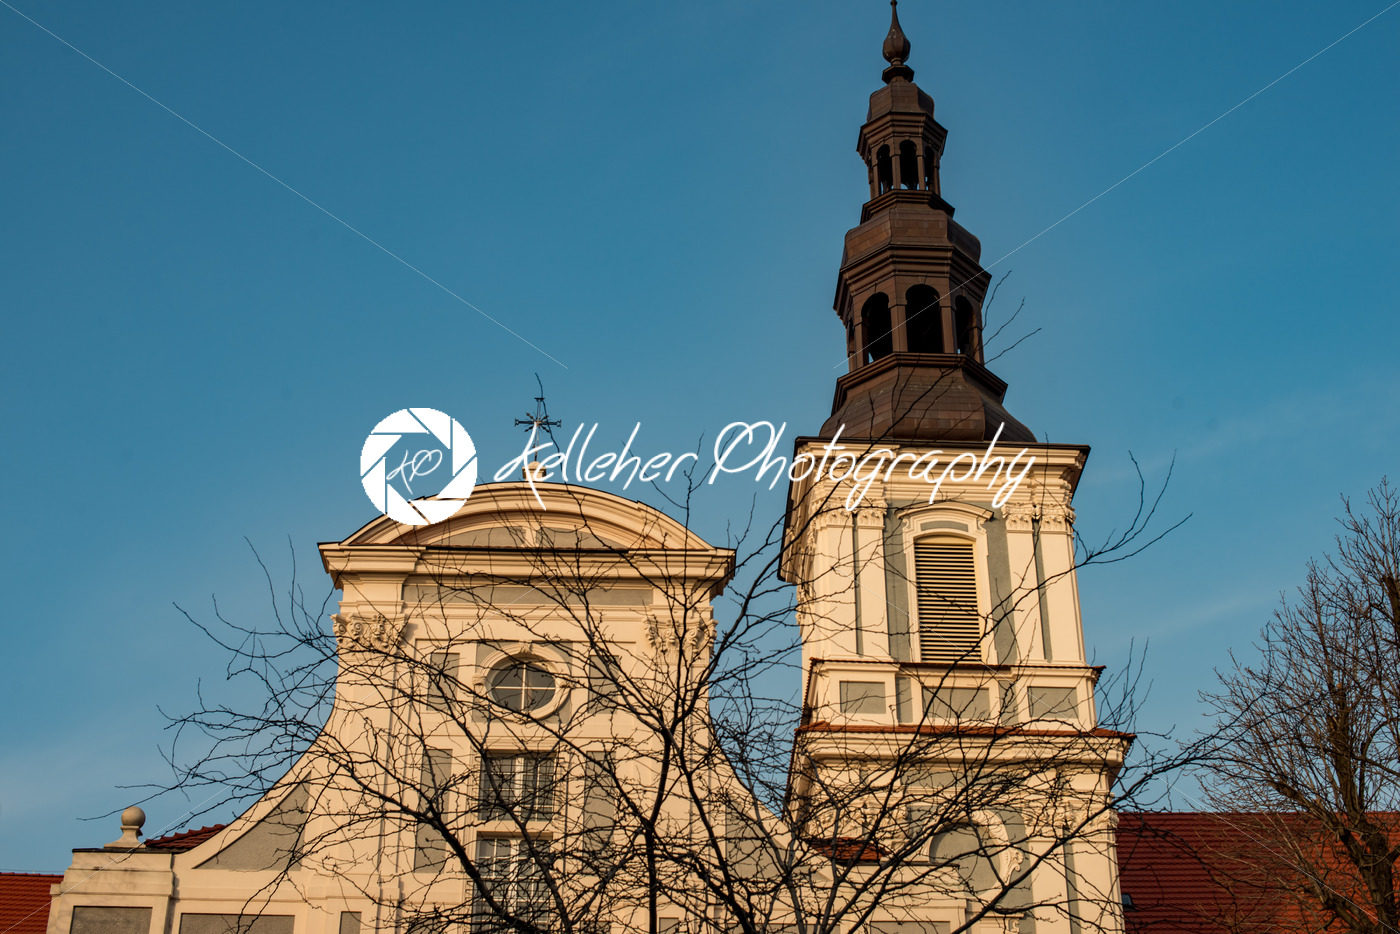 Wroclaw, Poland – March 4, 2018: Wroclaw Old Town historic area in the evening. - Kelleher Photography Store